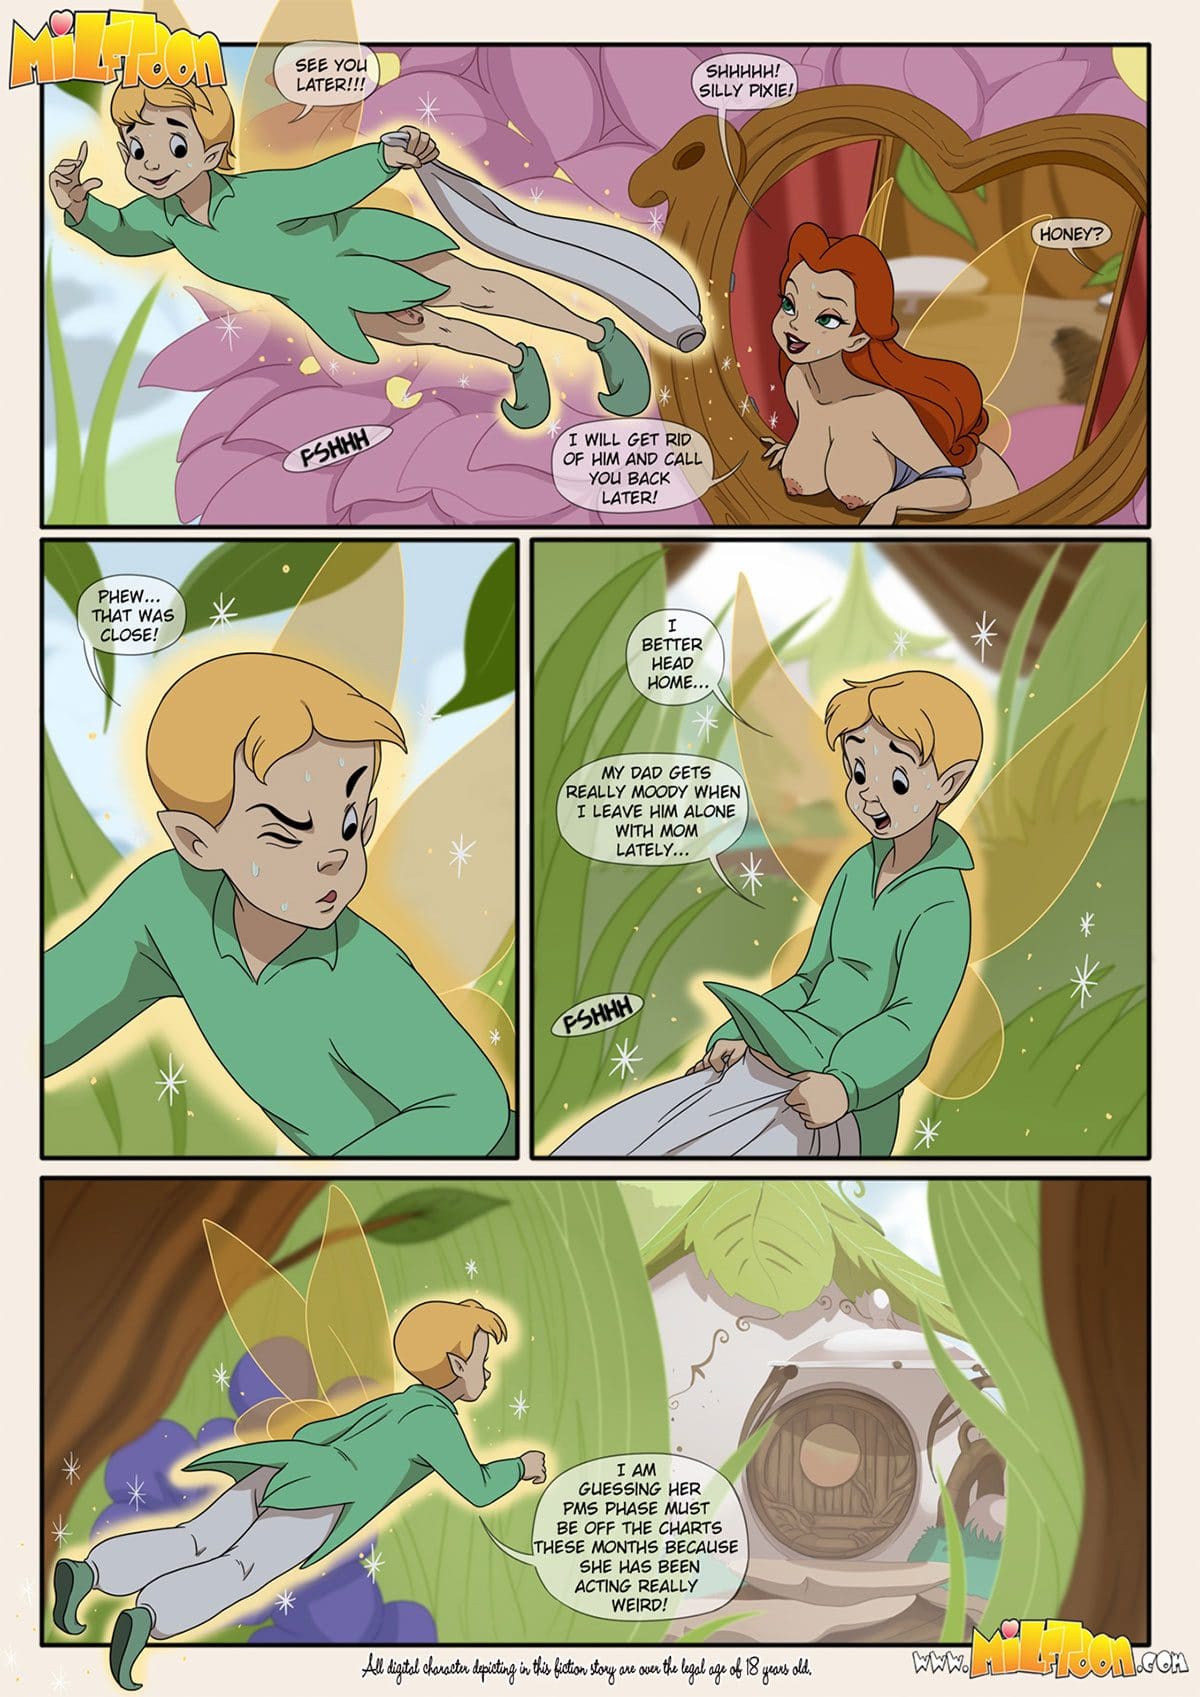 Milftoon comic "TinkerFuck" - page 6